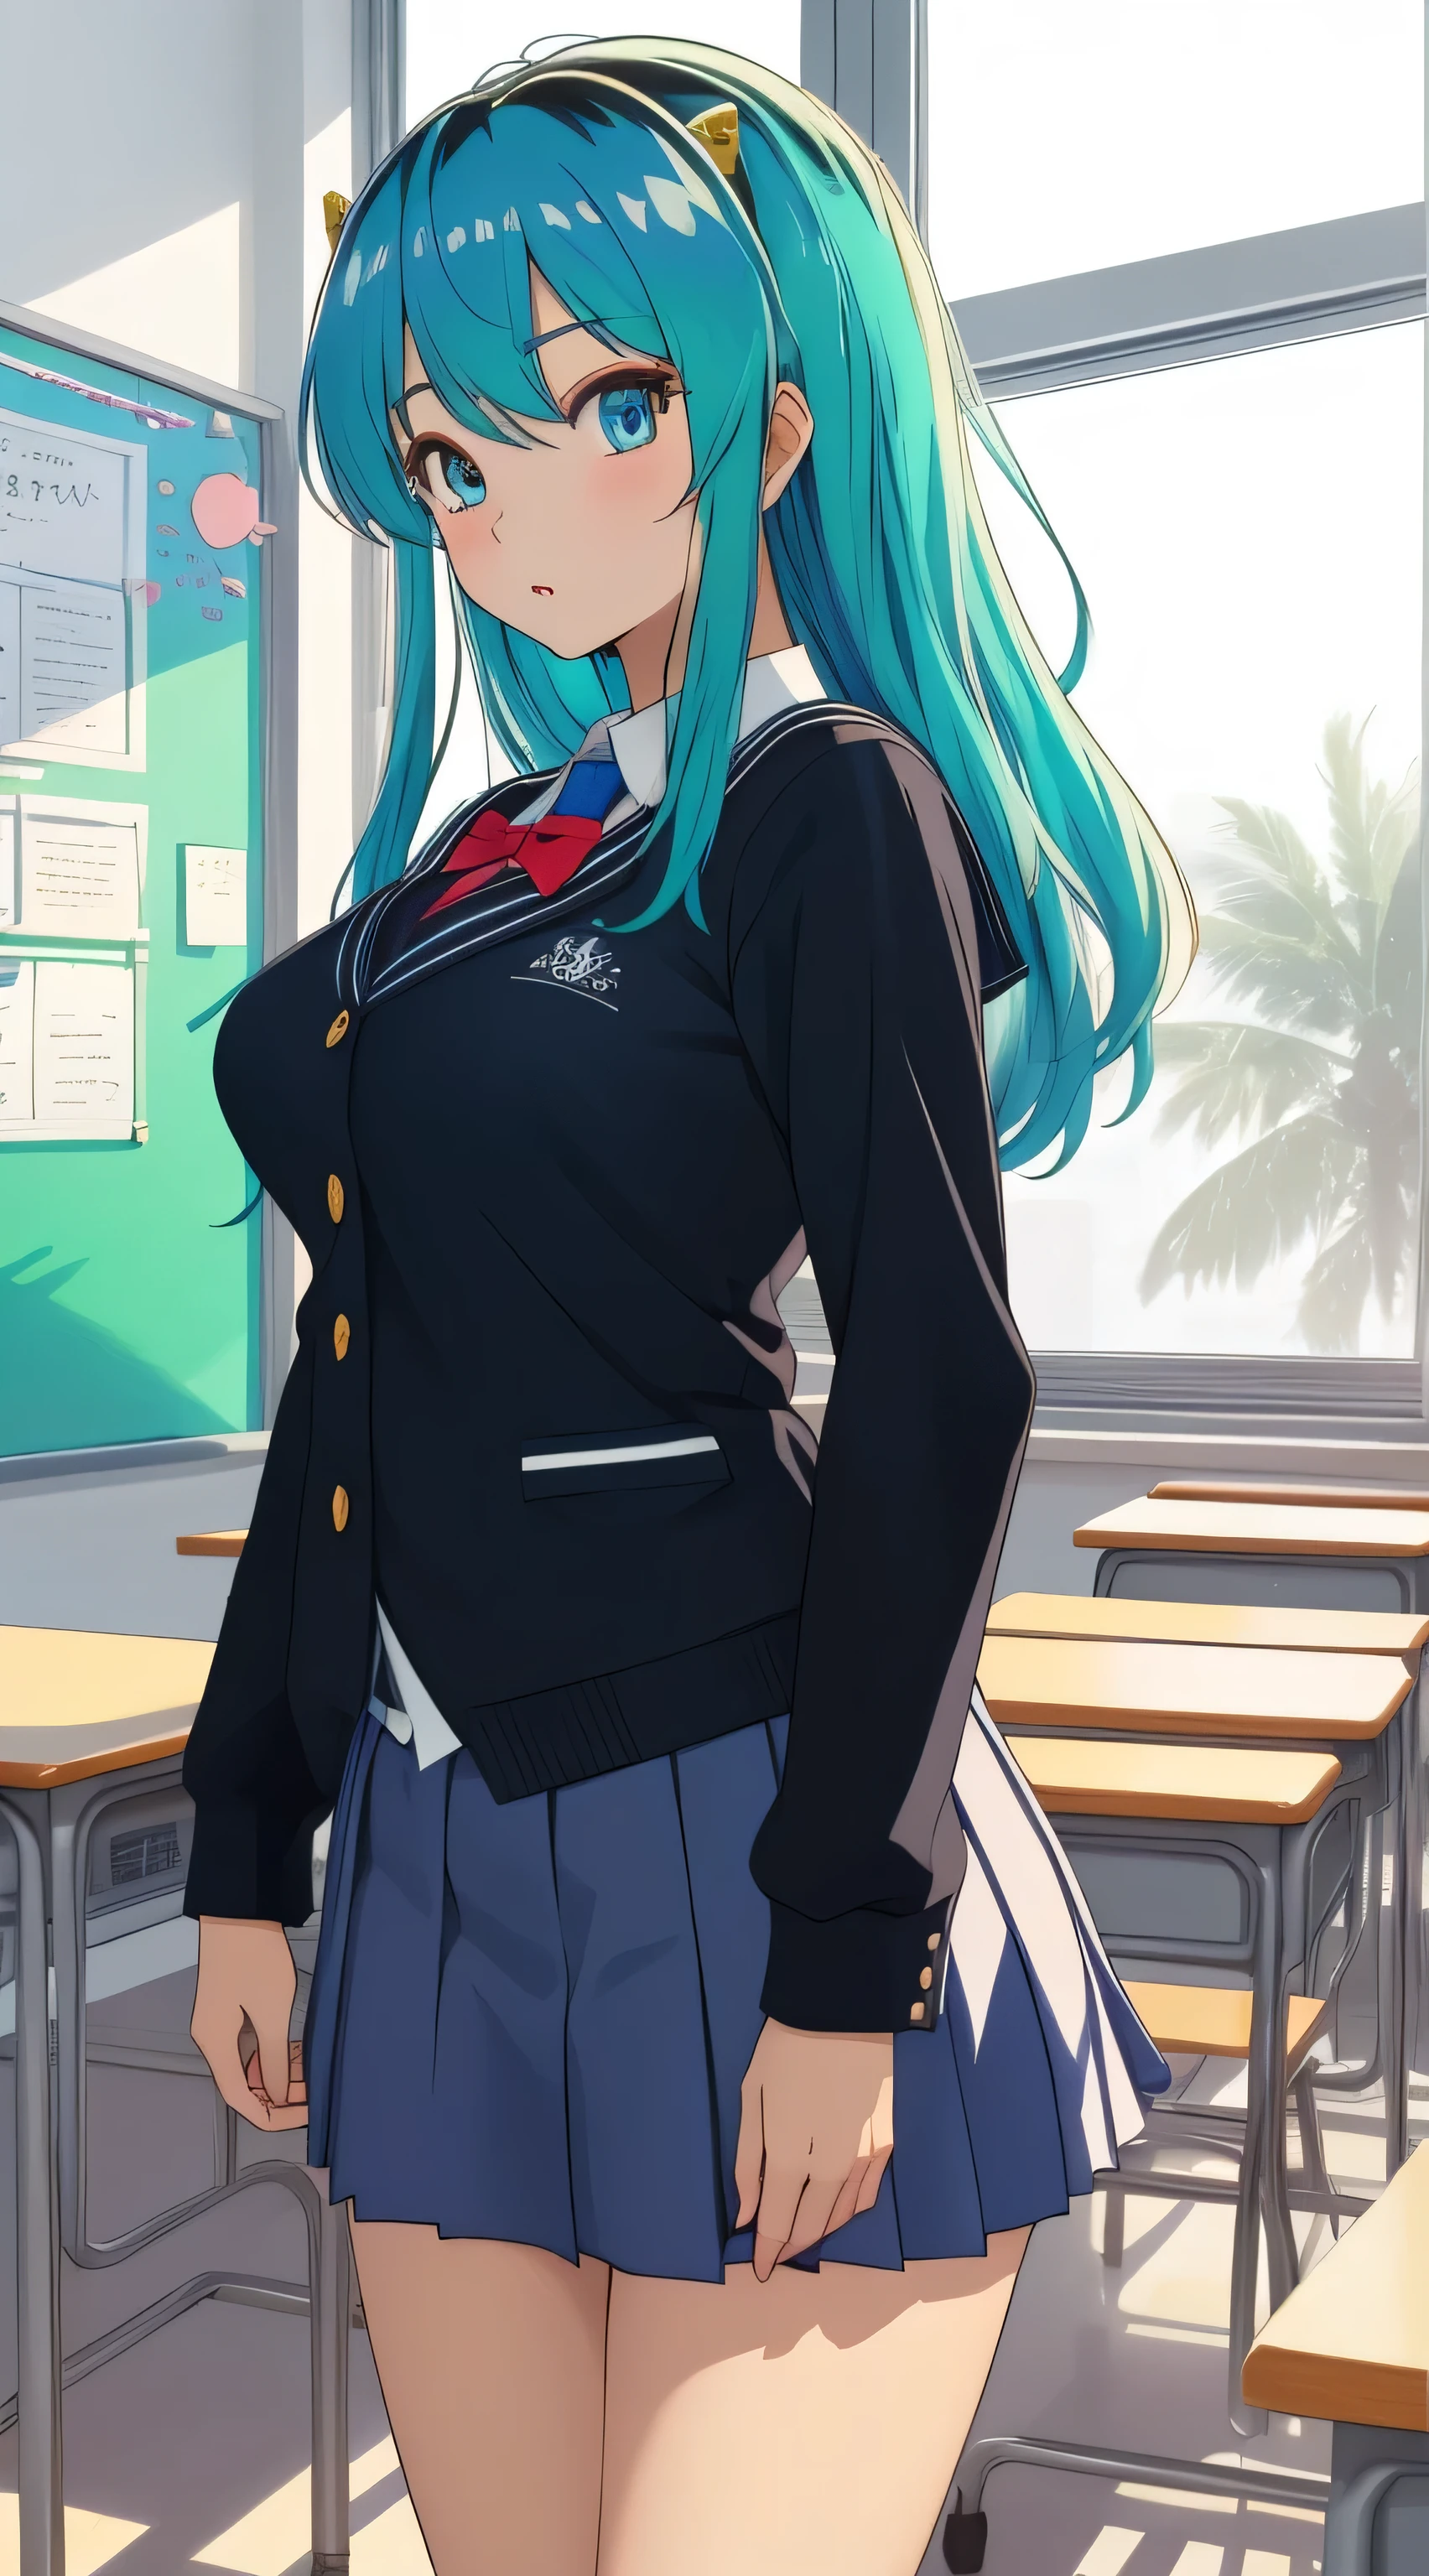 Ram, sexy, Mature face, Sexy smile、Extremely detailed eyes、Blue Eyes, Turquoise Hair、Cute demon horns、2Book corner、Tabletop, (Penetration: 1.2),((Short sailor suit, Detailed and accurate)), Summer 3/4 sleeve shirt、In a glamorous body, Big Breasts:1.6, ((School uniform skirt)), (I can see her panties, Lace, Accurate and detailed), Sexy Poses,refer to４Bookの中に親refer to１Book,On a desk in the classroom、Classroom Background、